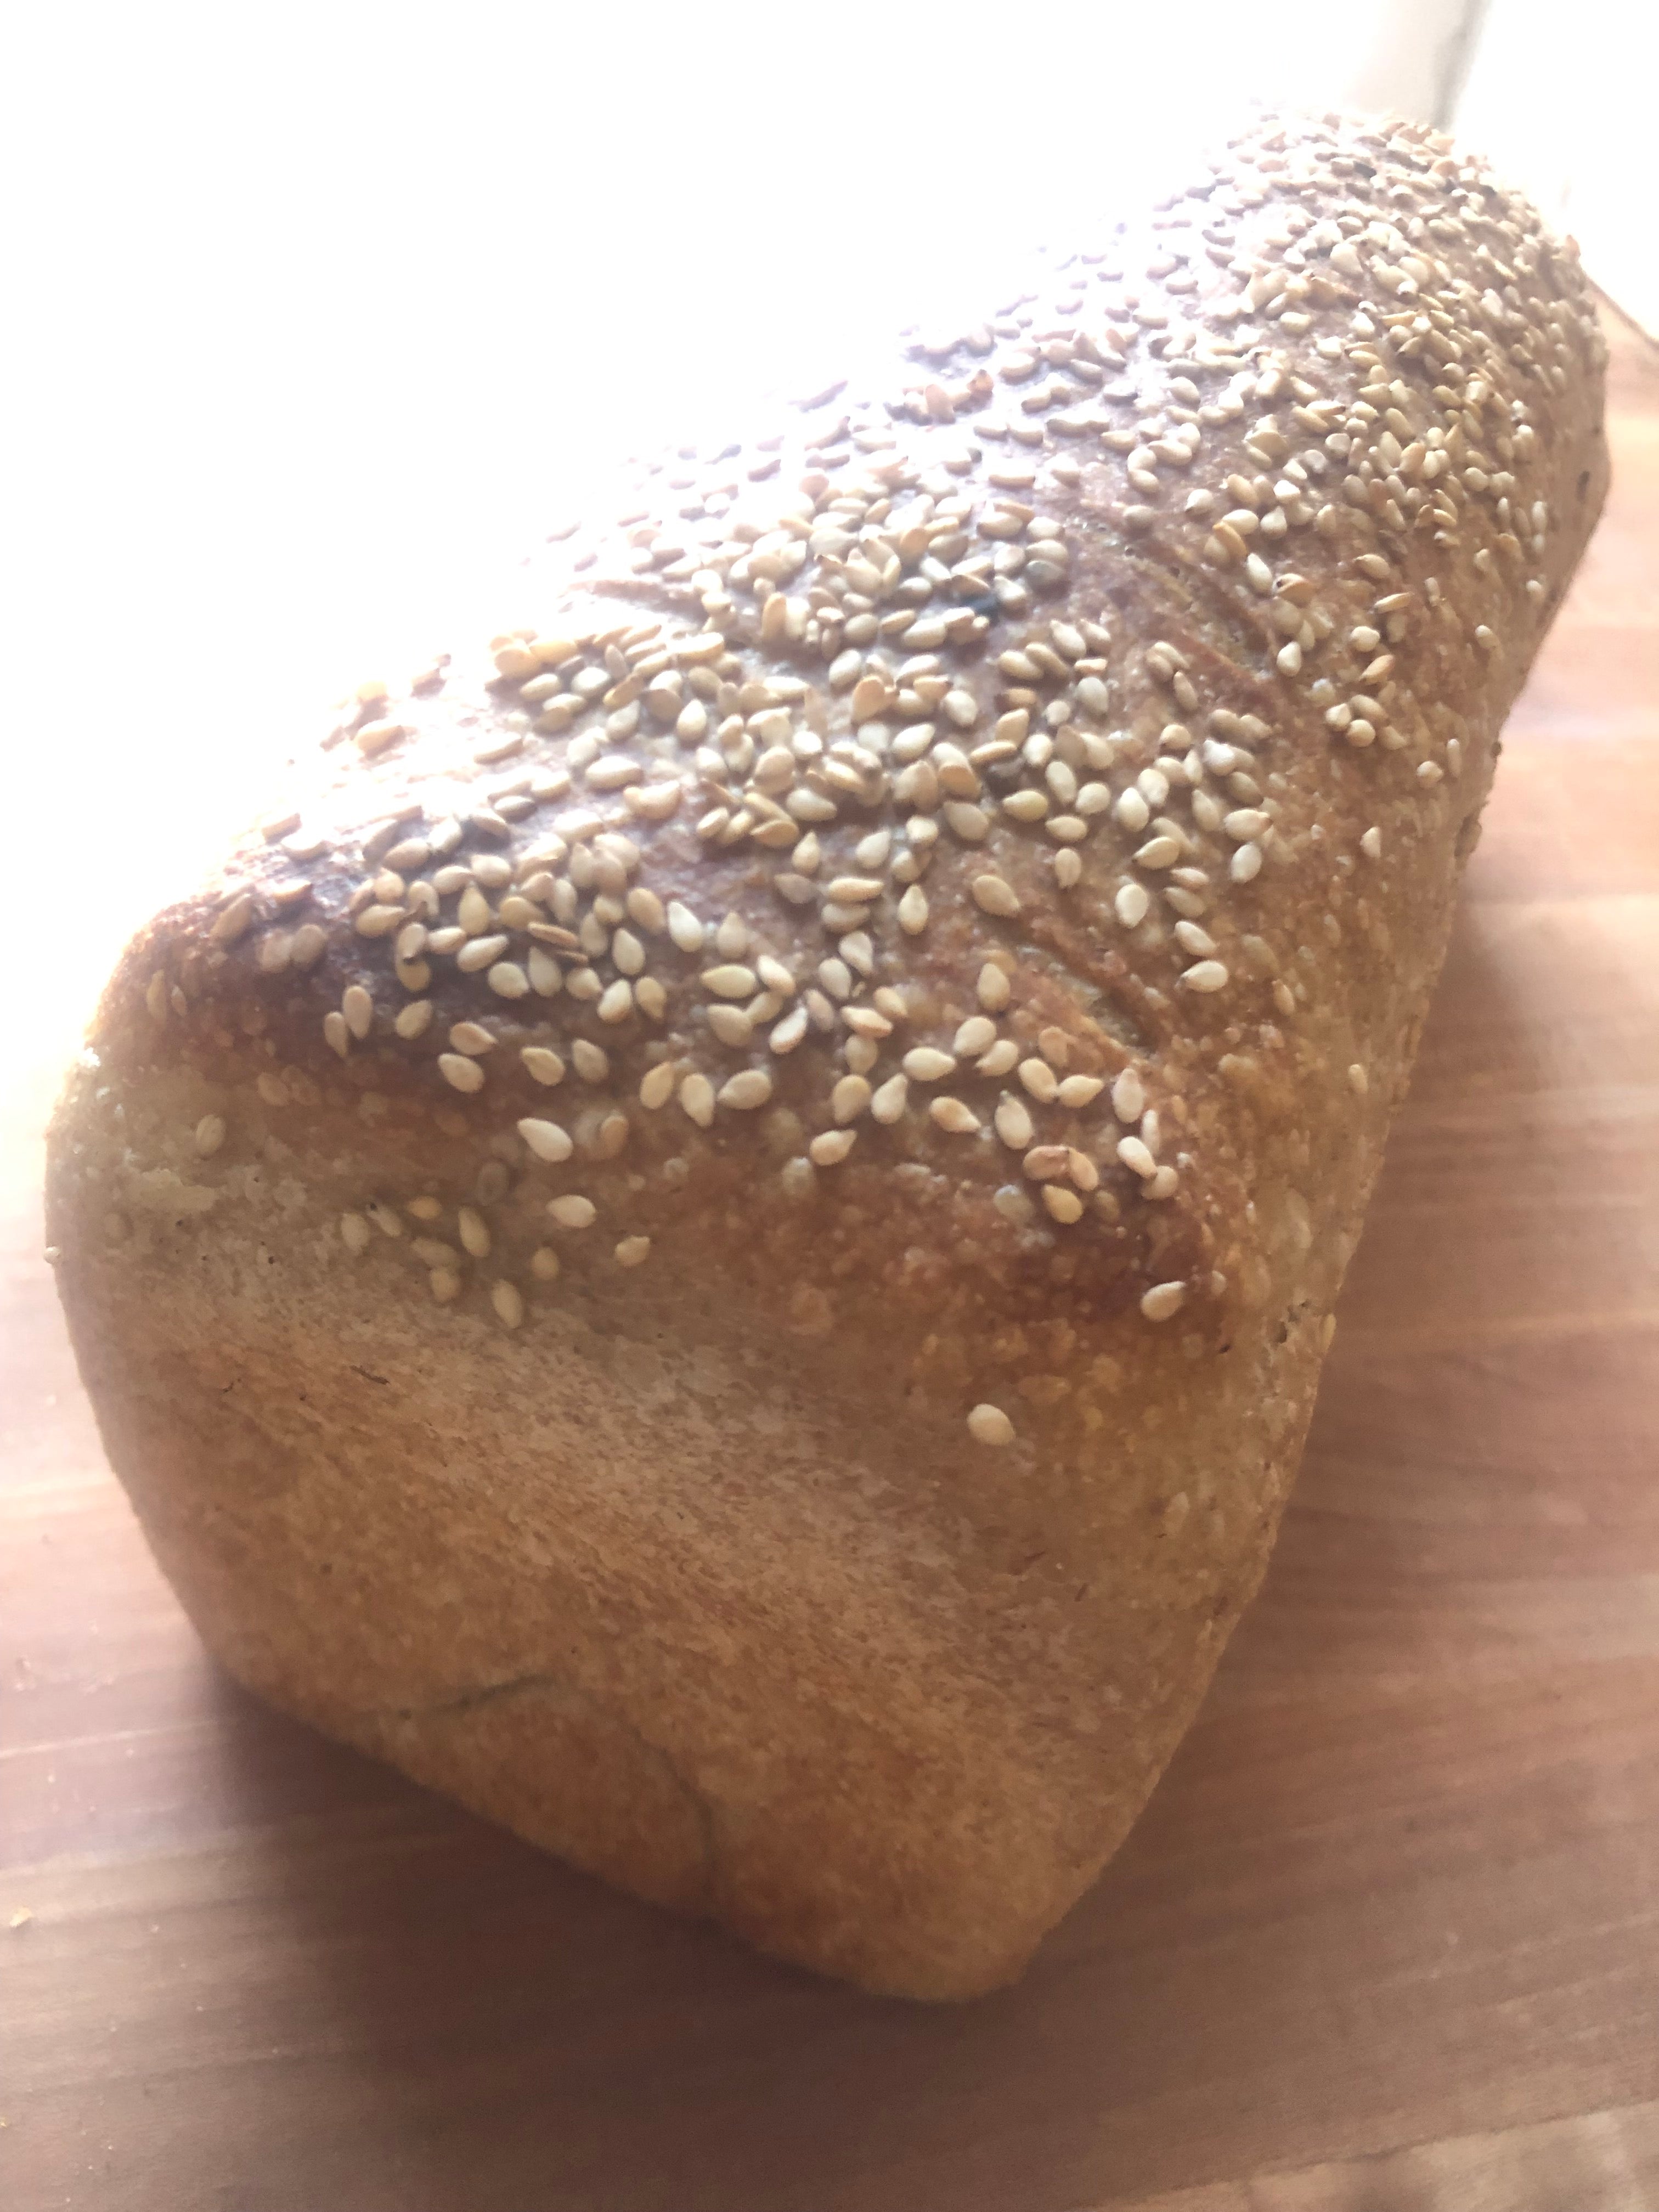 WED MAY 15th sourdough sandwich bread - Porch Pick up 4-9pm  OR Purplebrown Farm Store 4:30-6